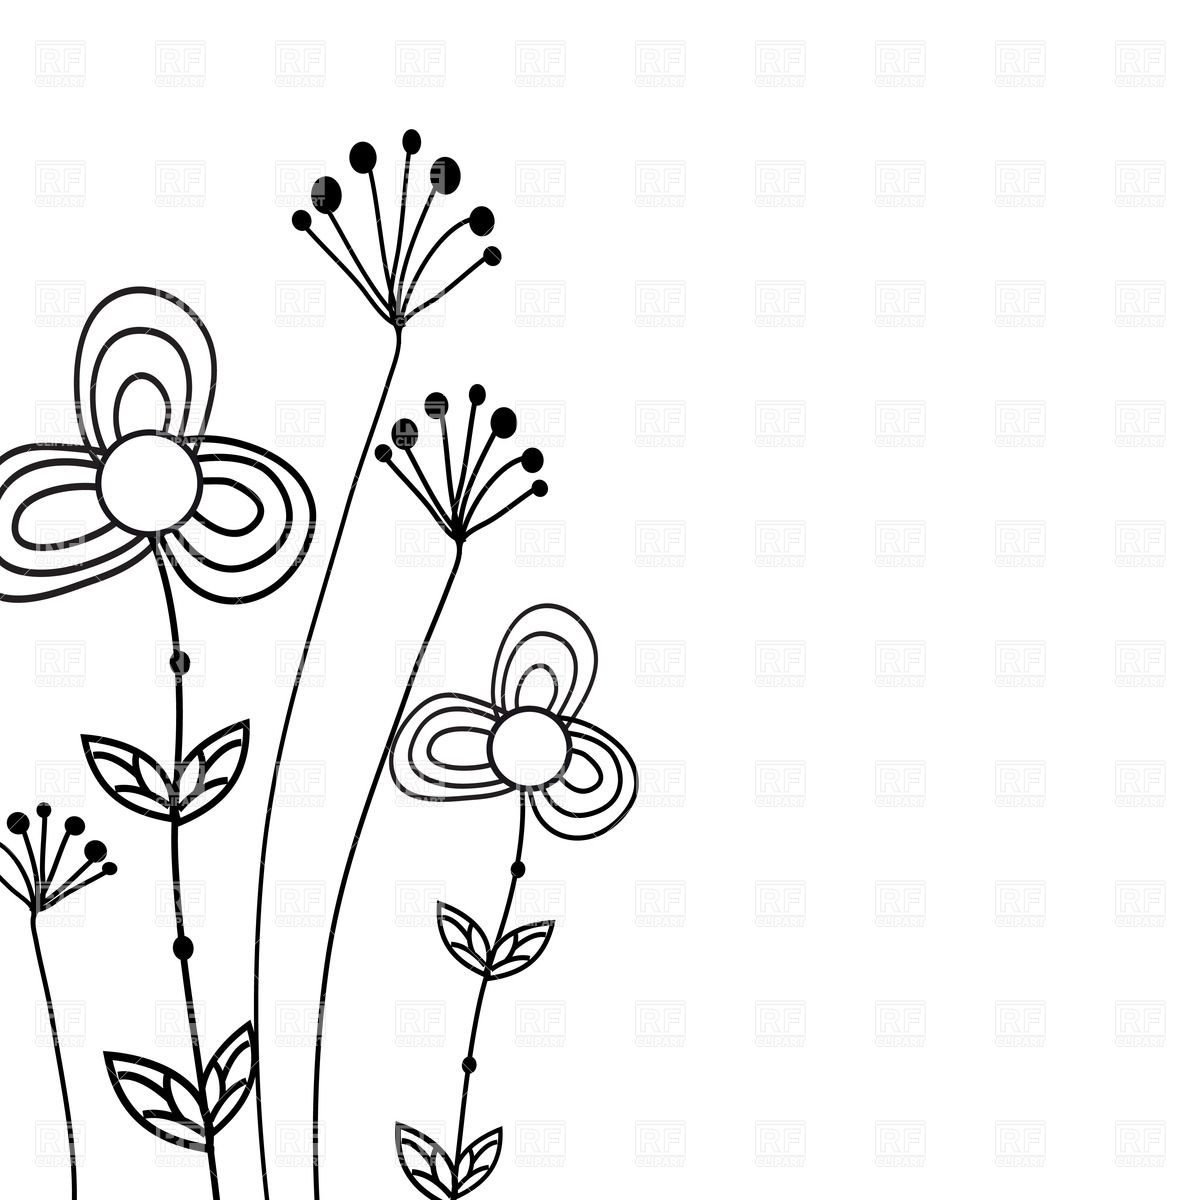 Download Wildflower Vector at Vectorified.com | Collection of ...